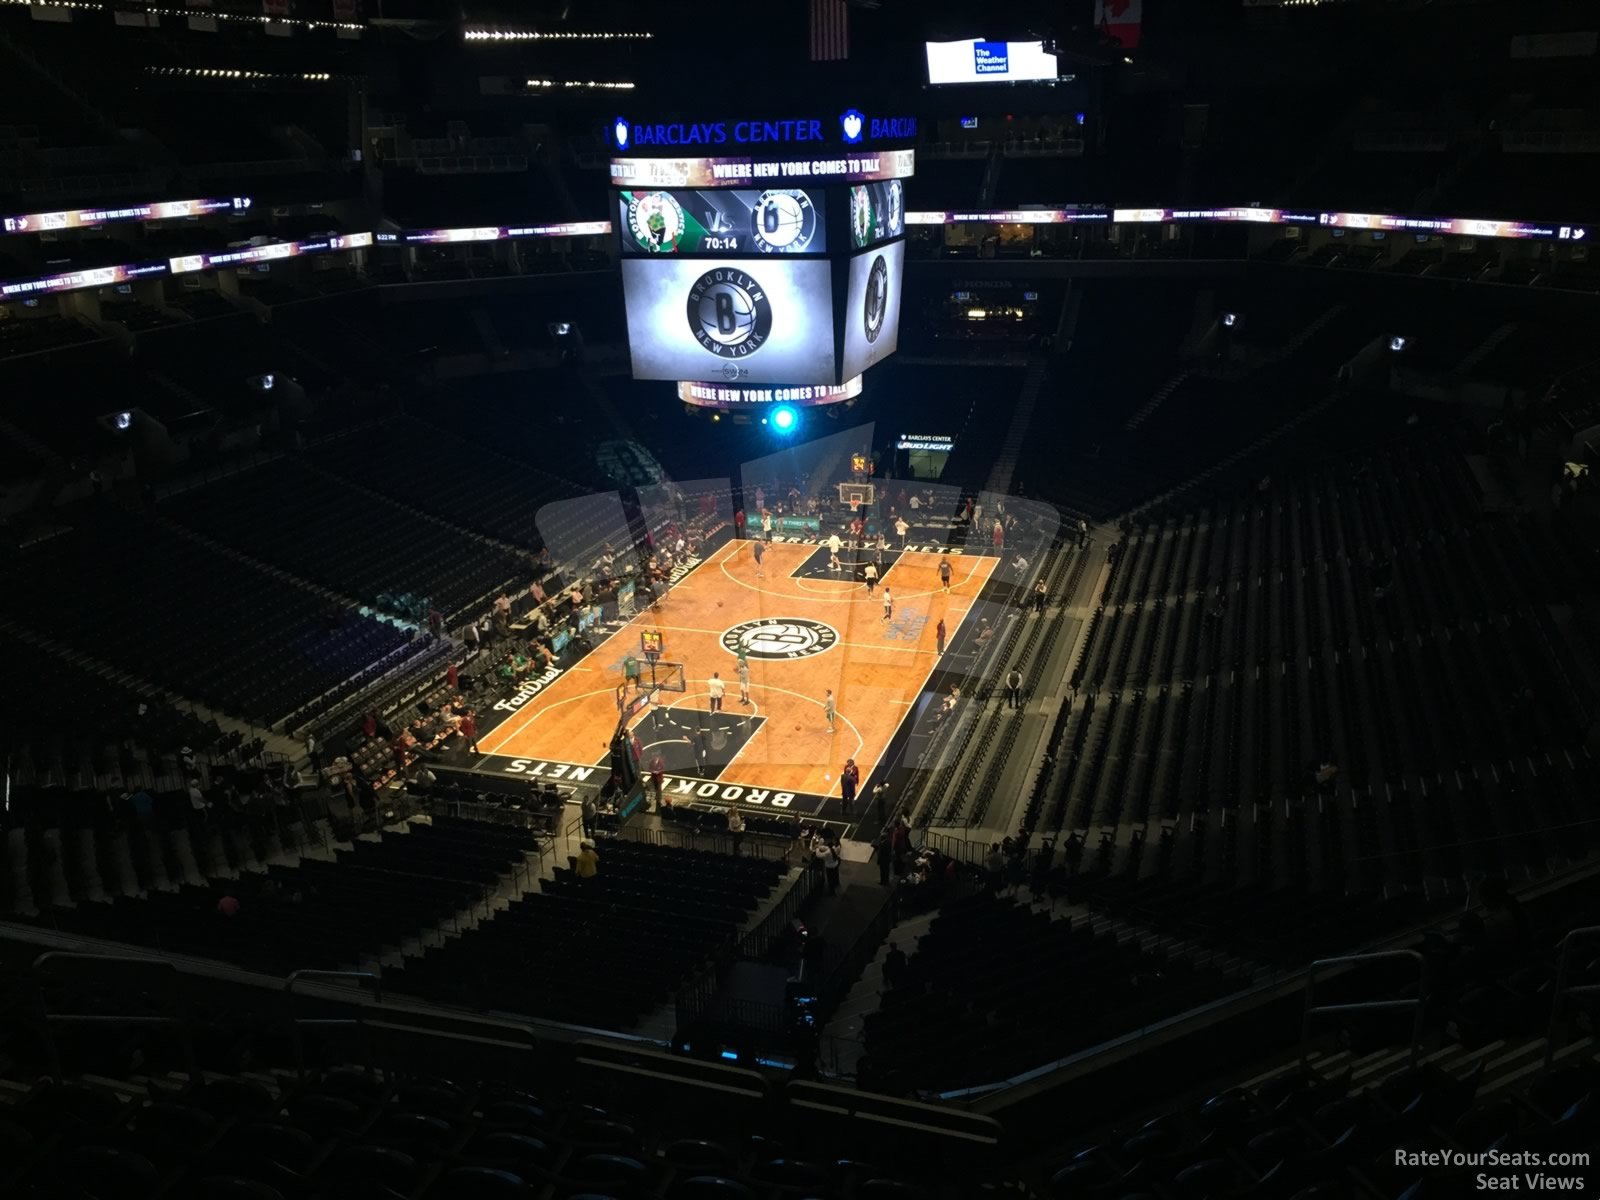 section 230, row 10 seat view  for basketball - barclays center